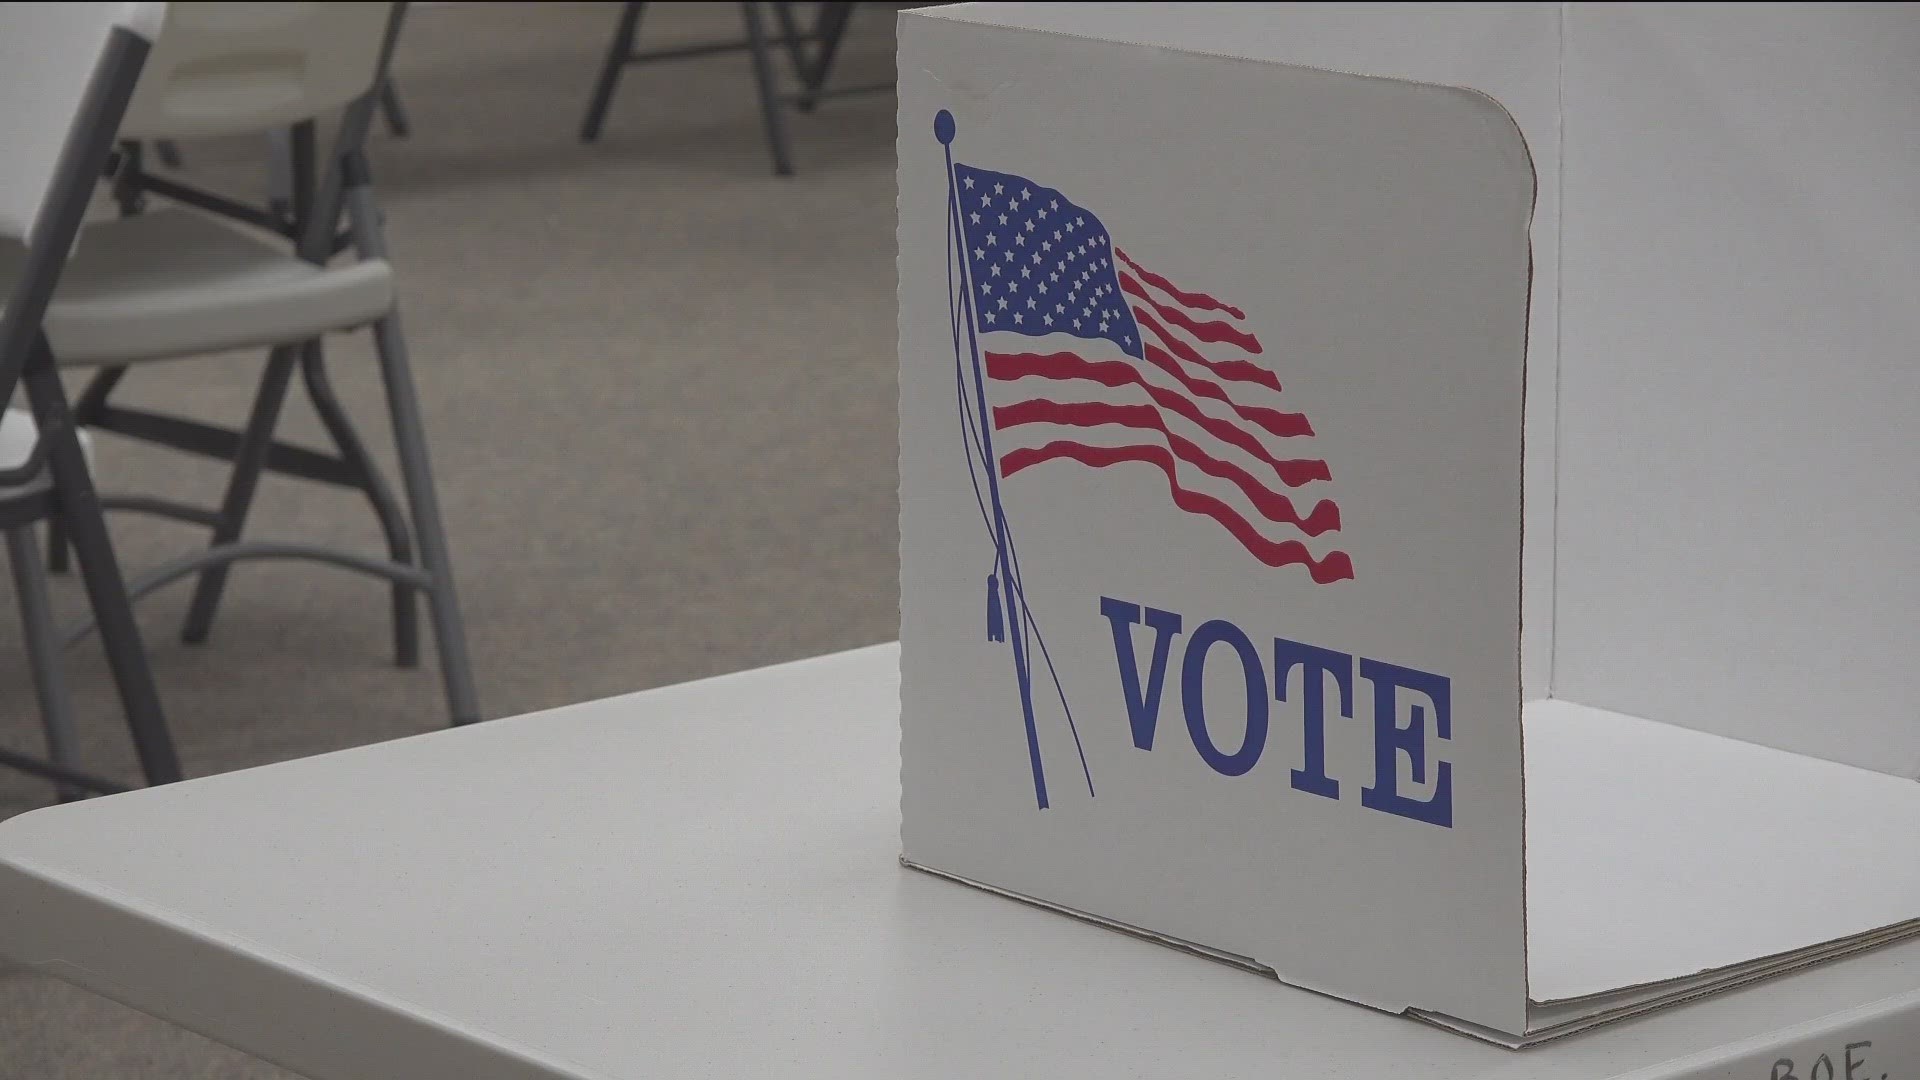 Resources will be available at Main Library in Toledo Saturday to help voters who need IDs get them in time for the August special election.